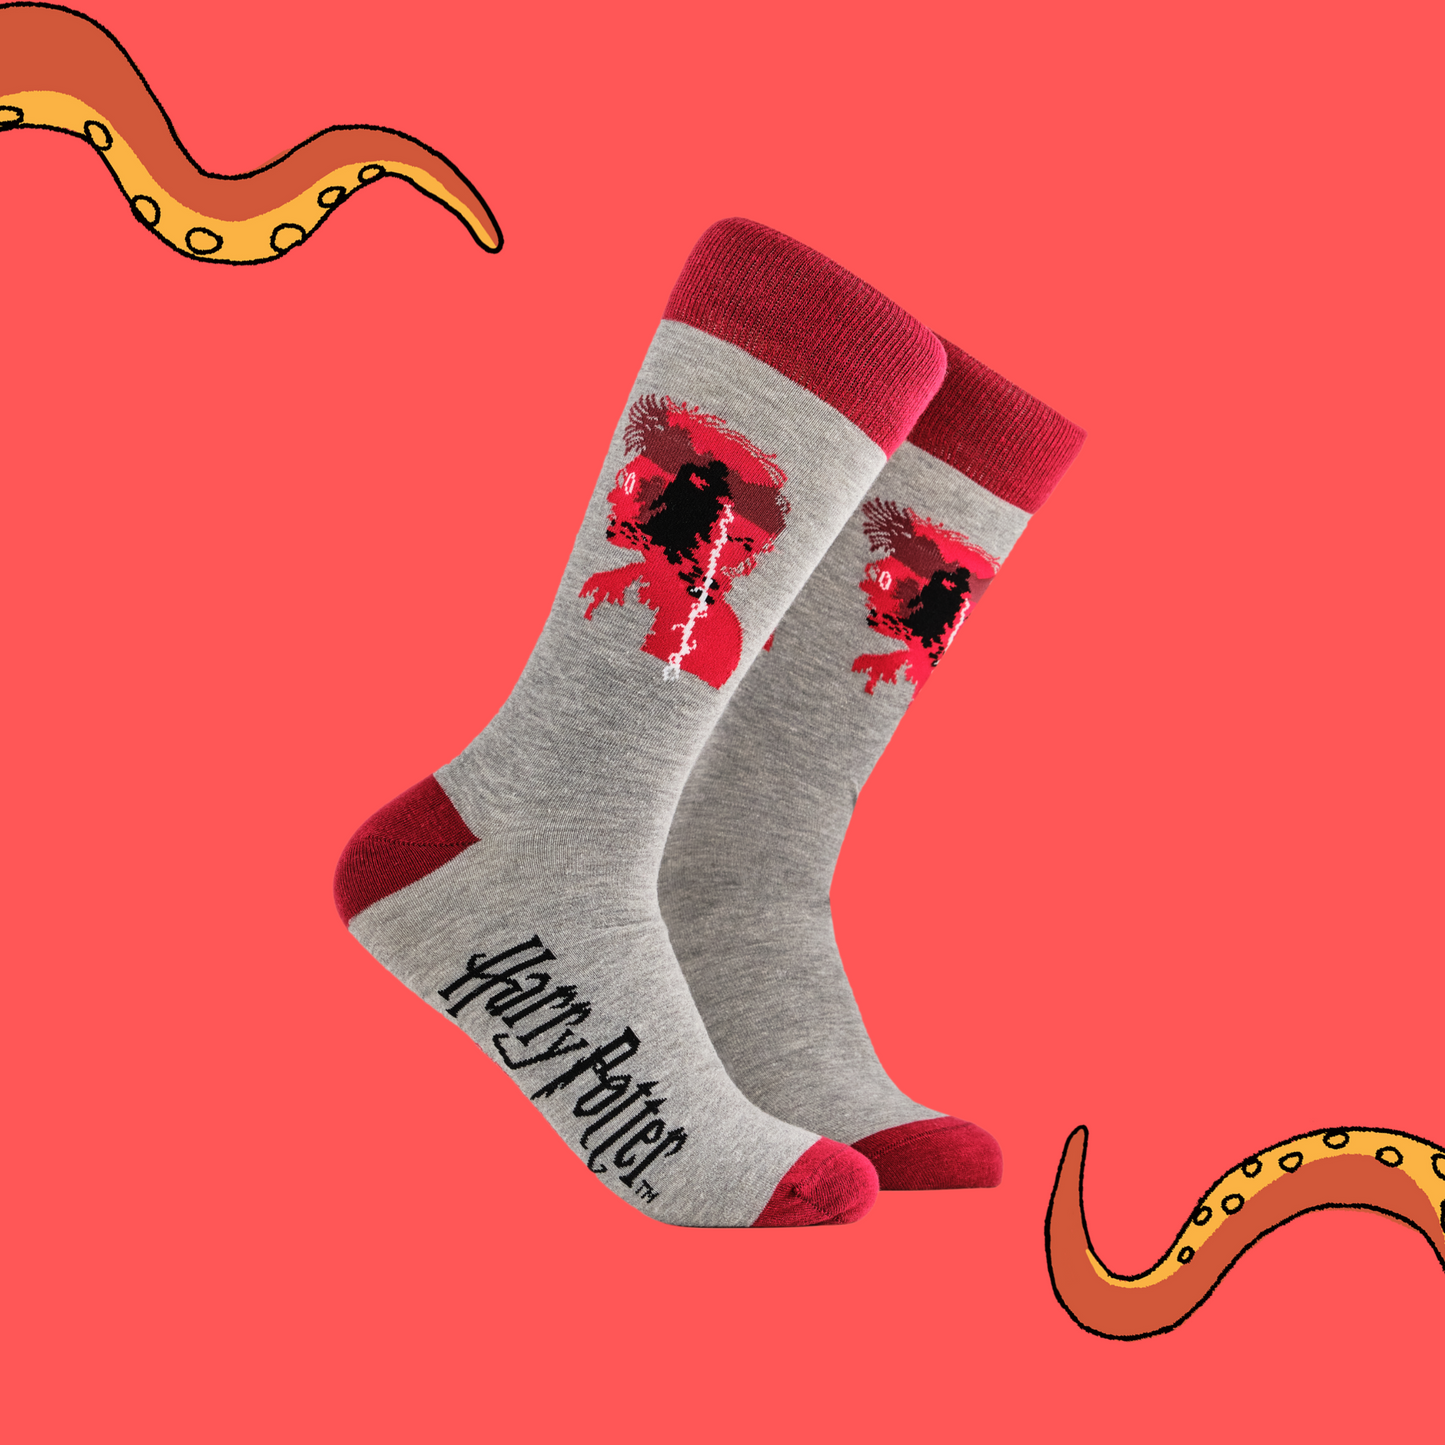 A pair of socks depicting Lord Voldemort. Grey legs, red cuff, heel and toe.